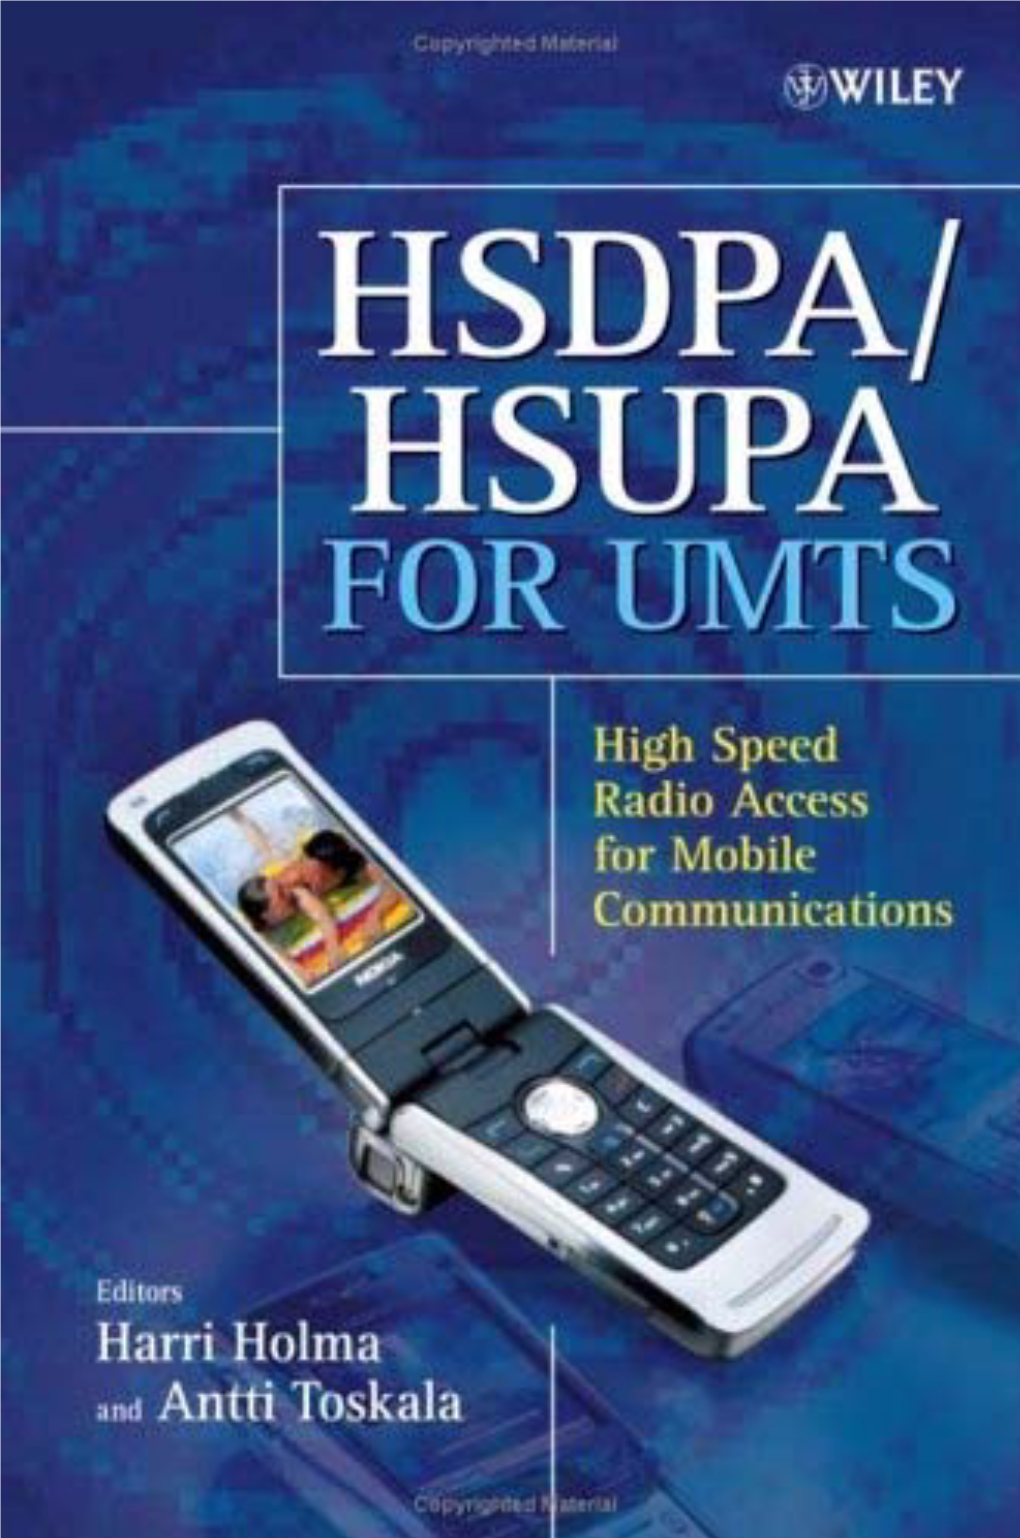 Wiley.HSDPA.HSUPA.For.UMTS.High.Speed.Radio.Access.For.Mobile.Communication.Pdf